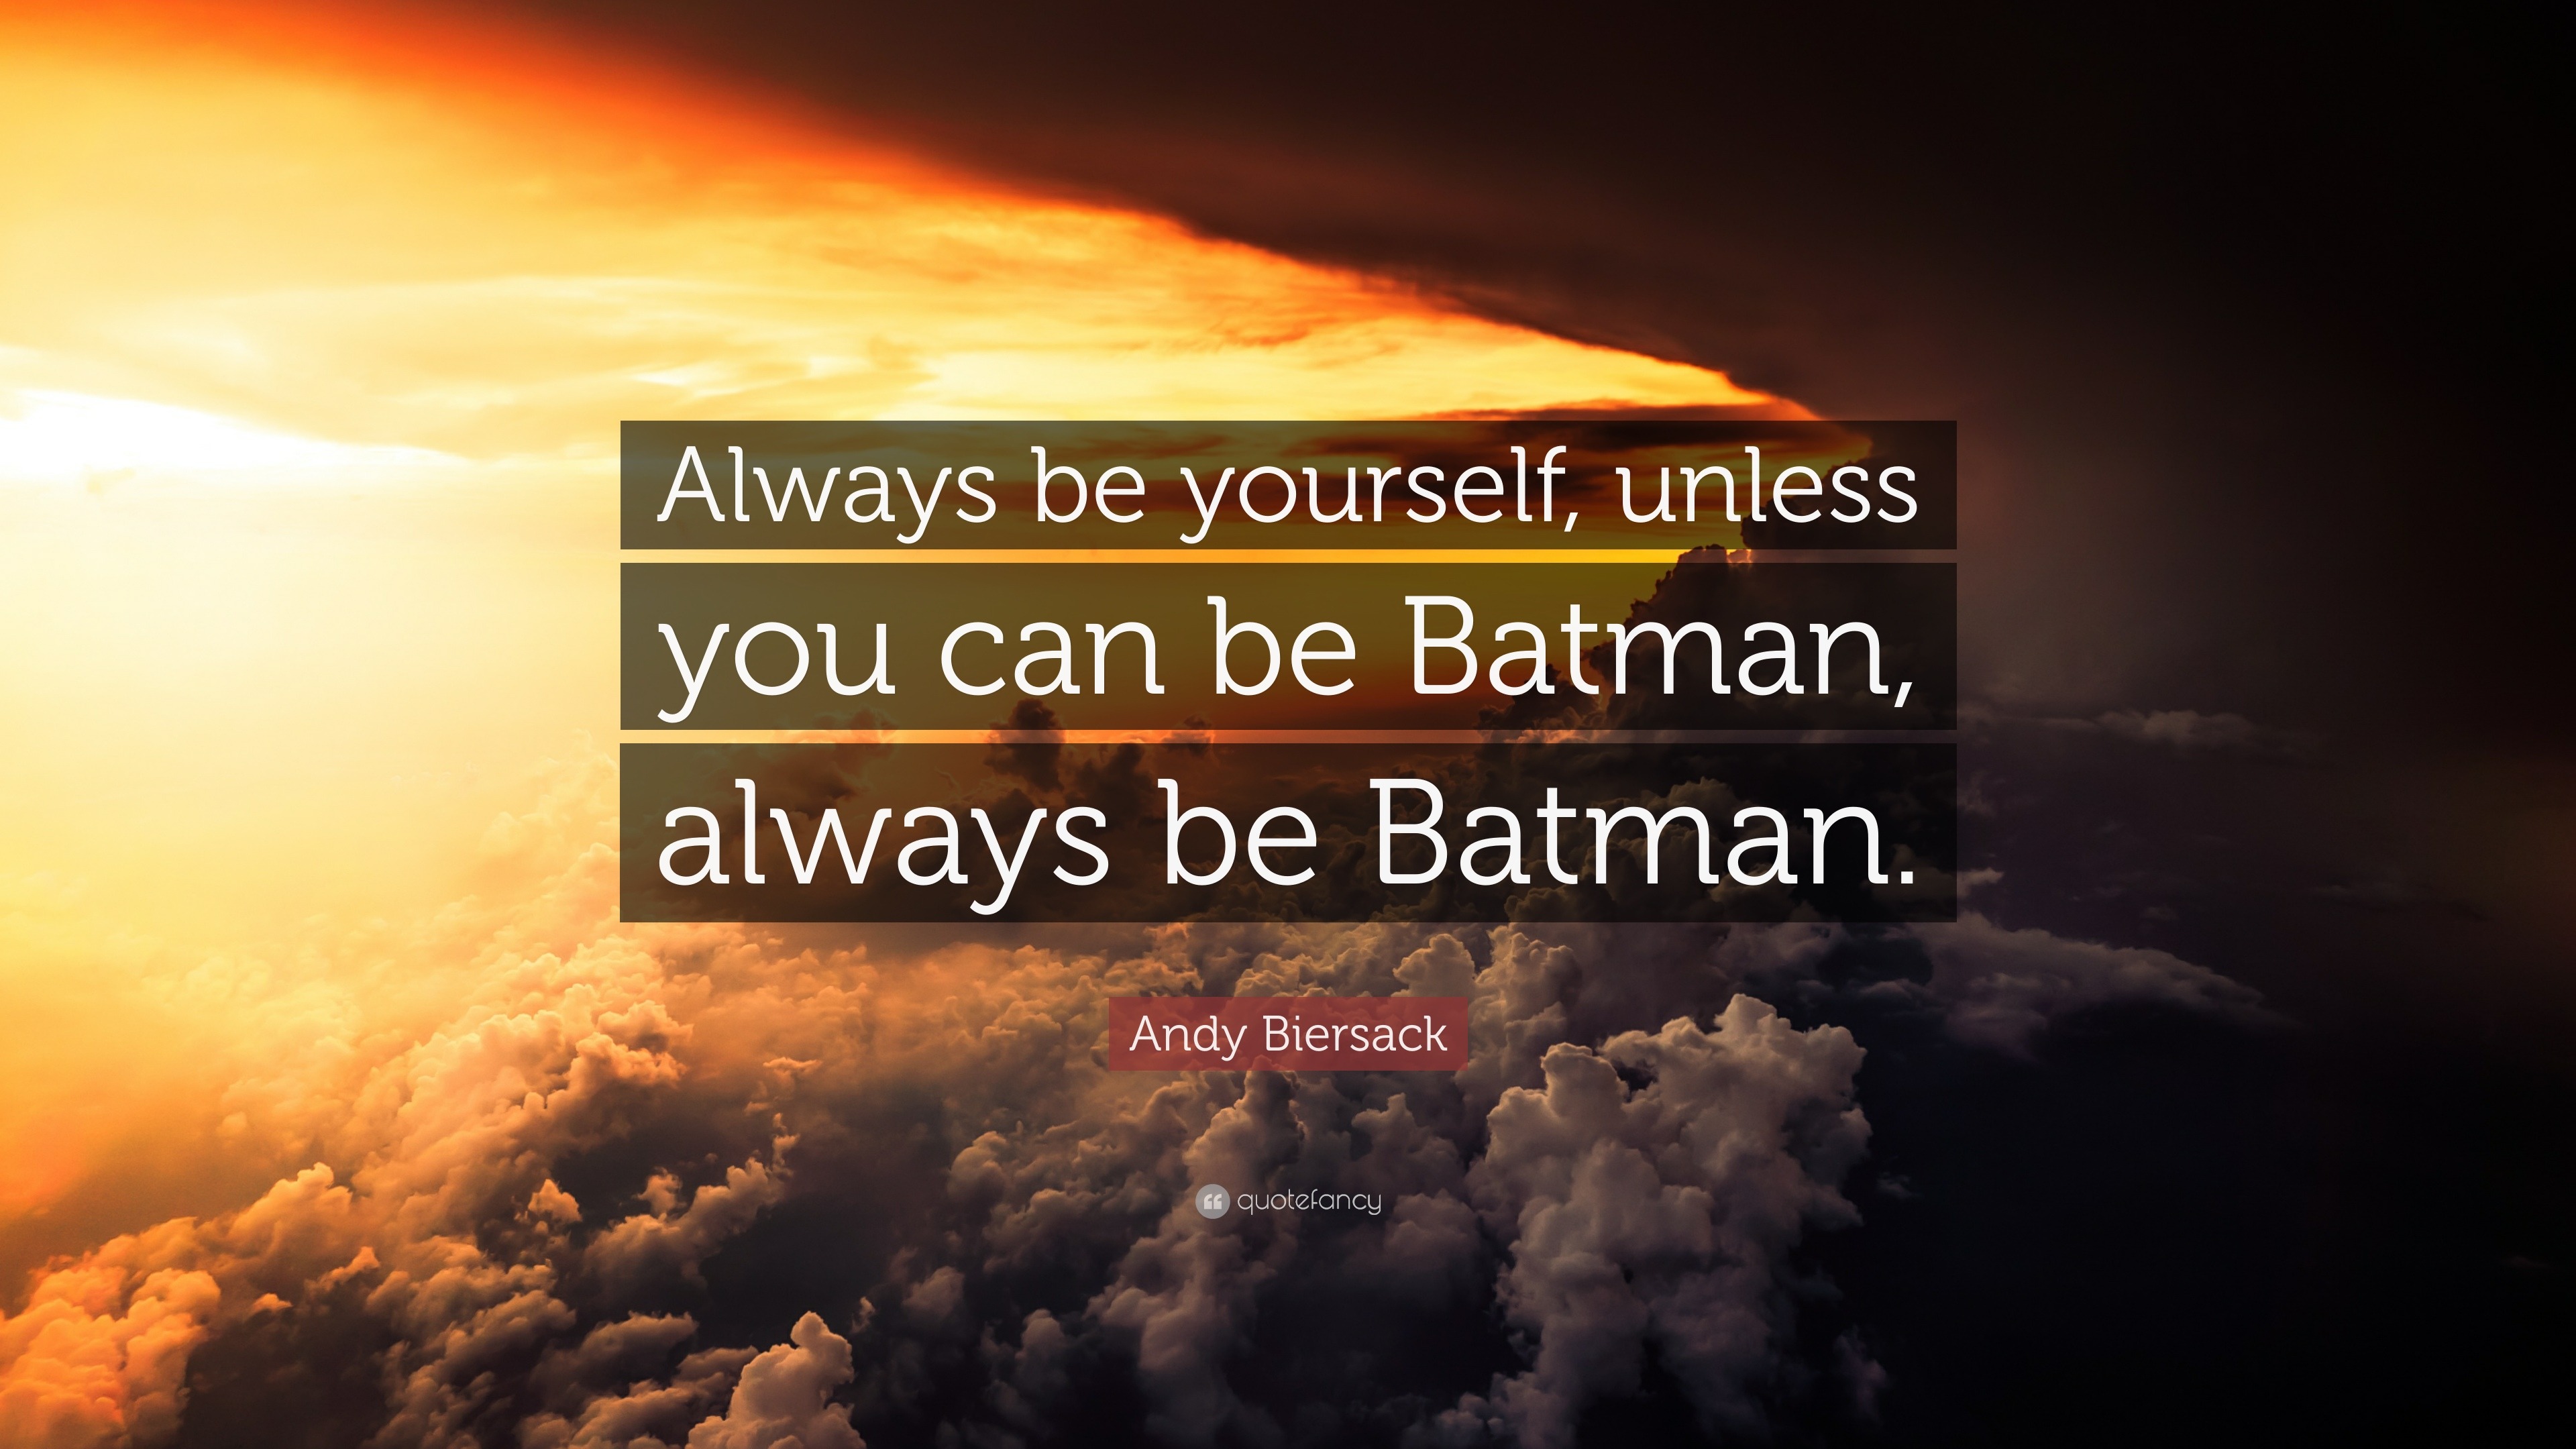 Andy Biersack Quote: “Always be yourself, unless you can be Batman, always  be Batman.”